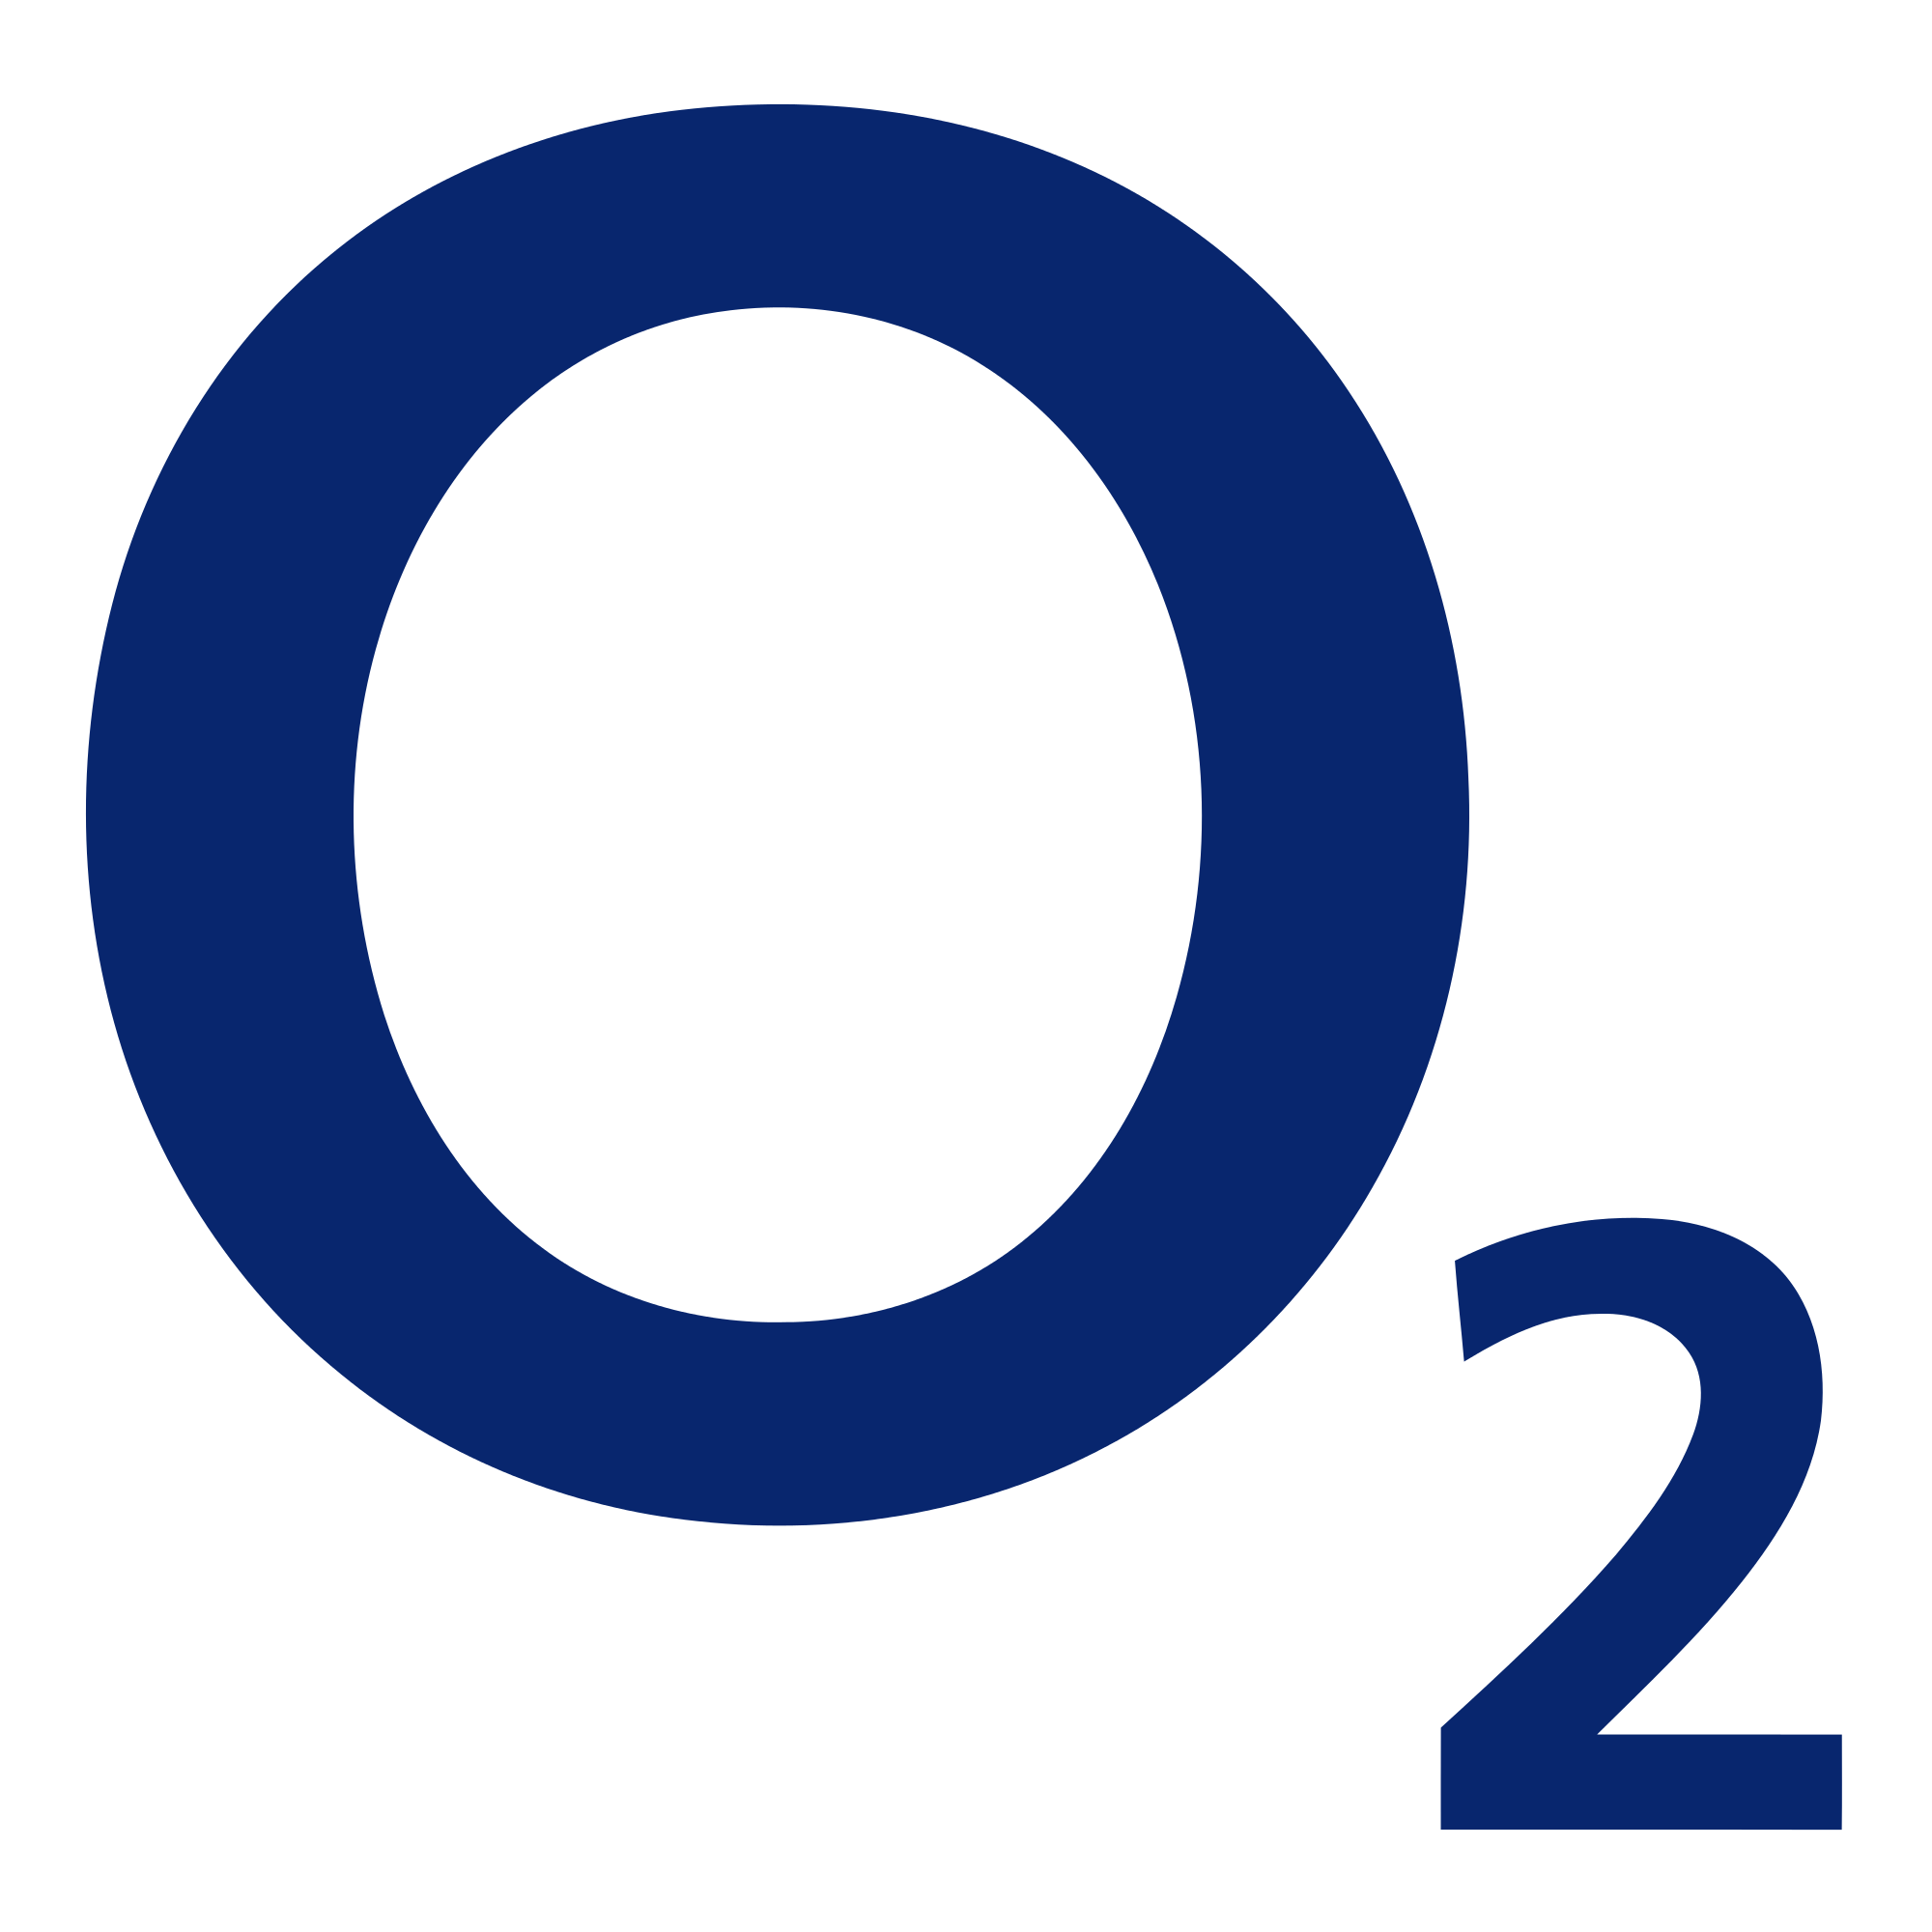 O2 roaming charges scrapped across Europe